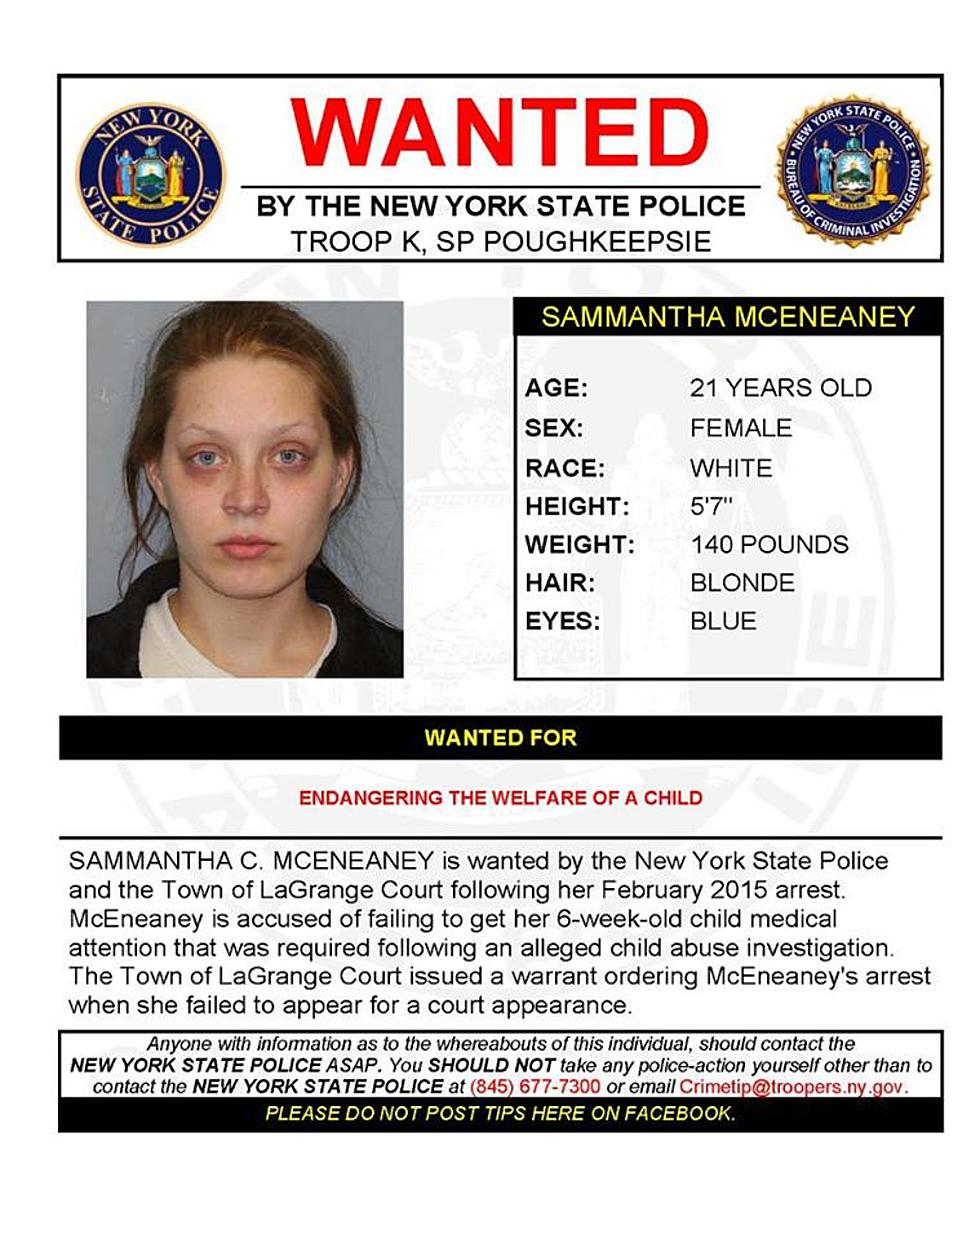 Warrant Wednesday: Dutchess County Woman Wanted For Endangering the Welfare of Her Six-Week Old Child